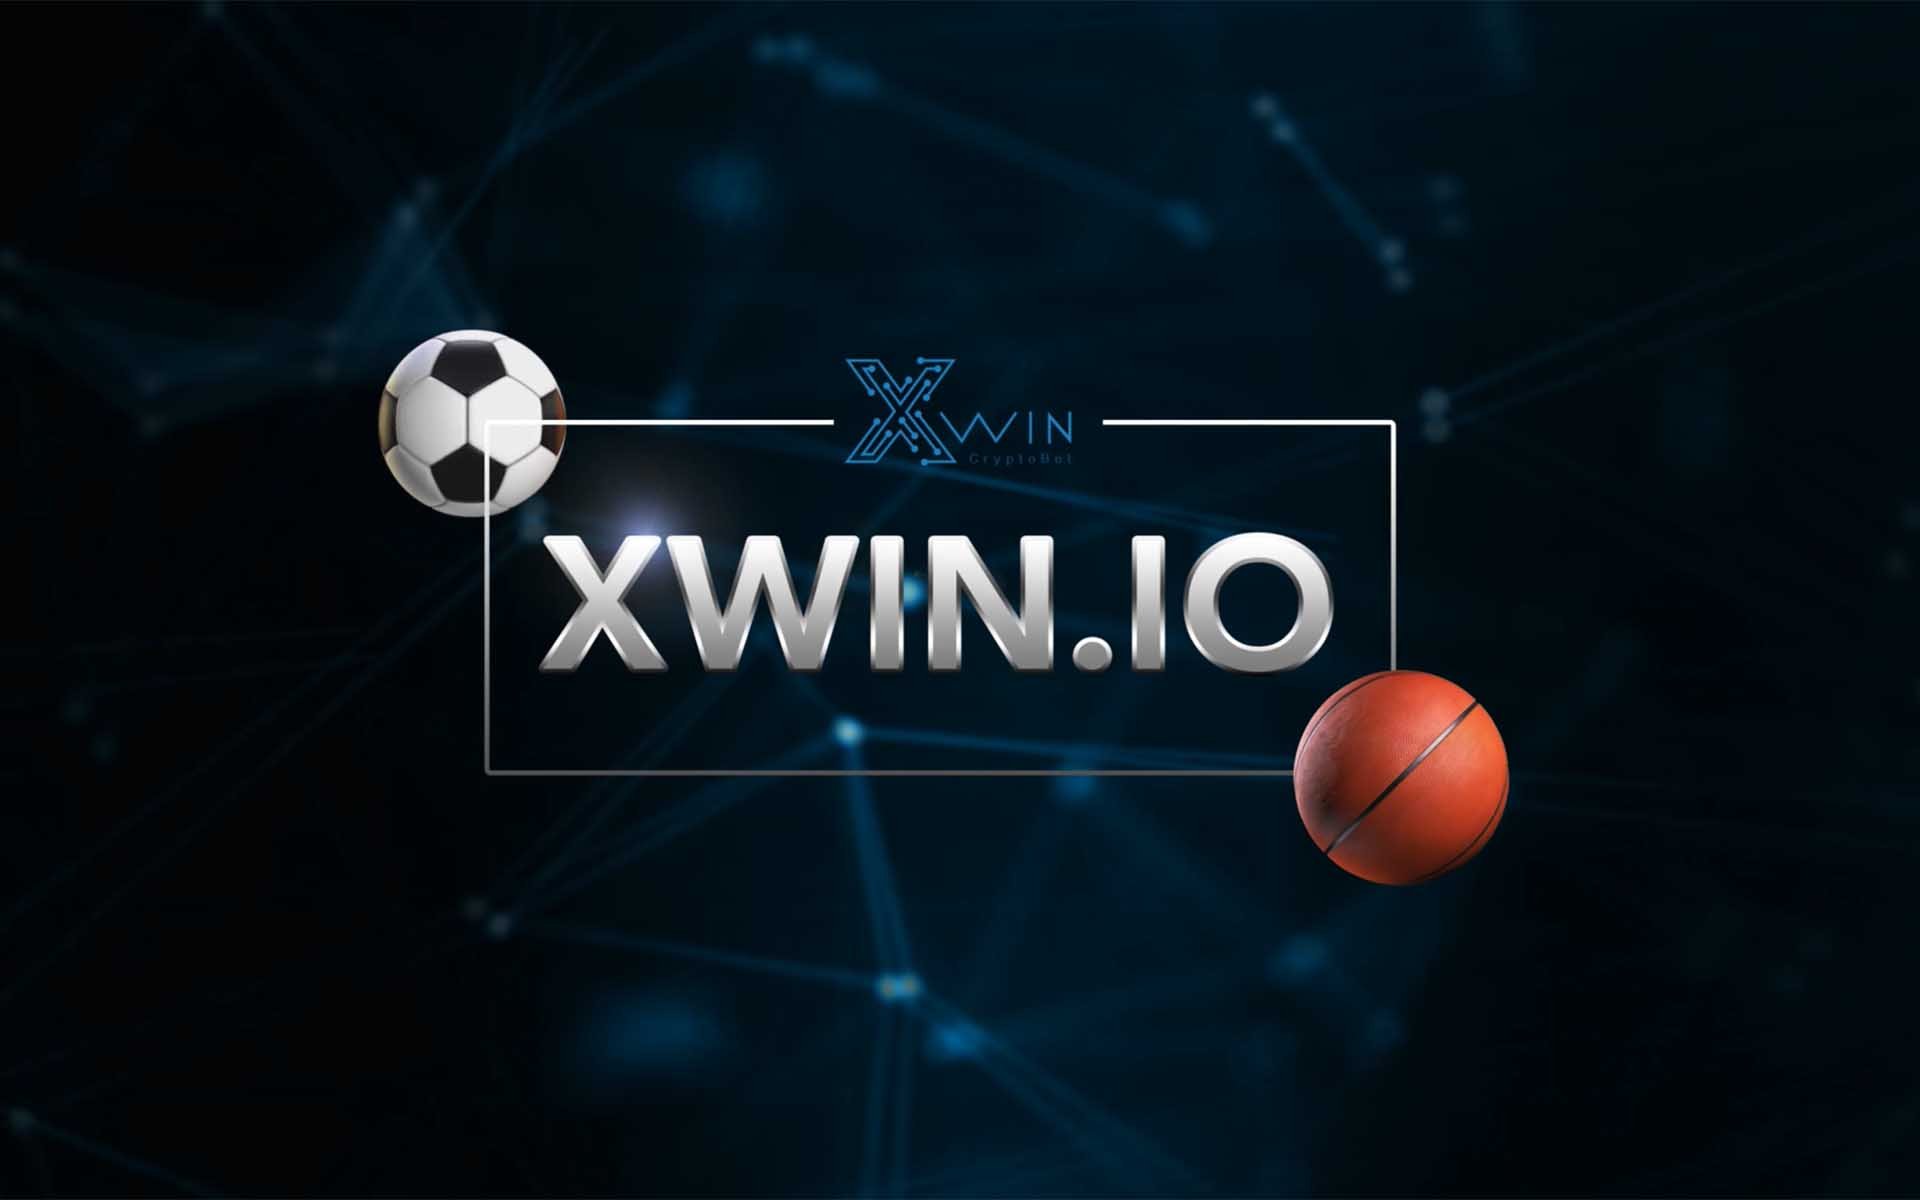 Blockchain Betting and Profit Sharing: A Look into the XWIN ICO